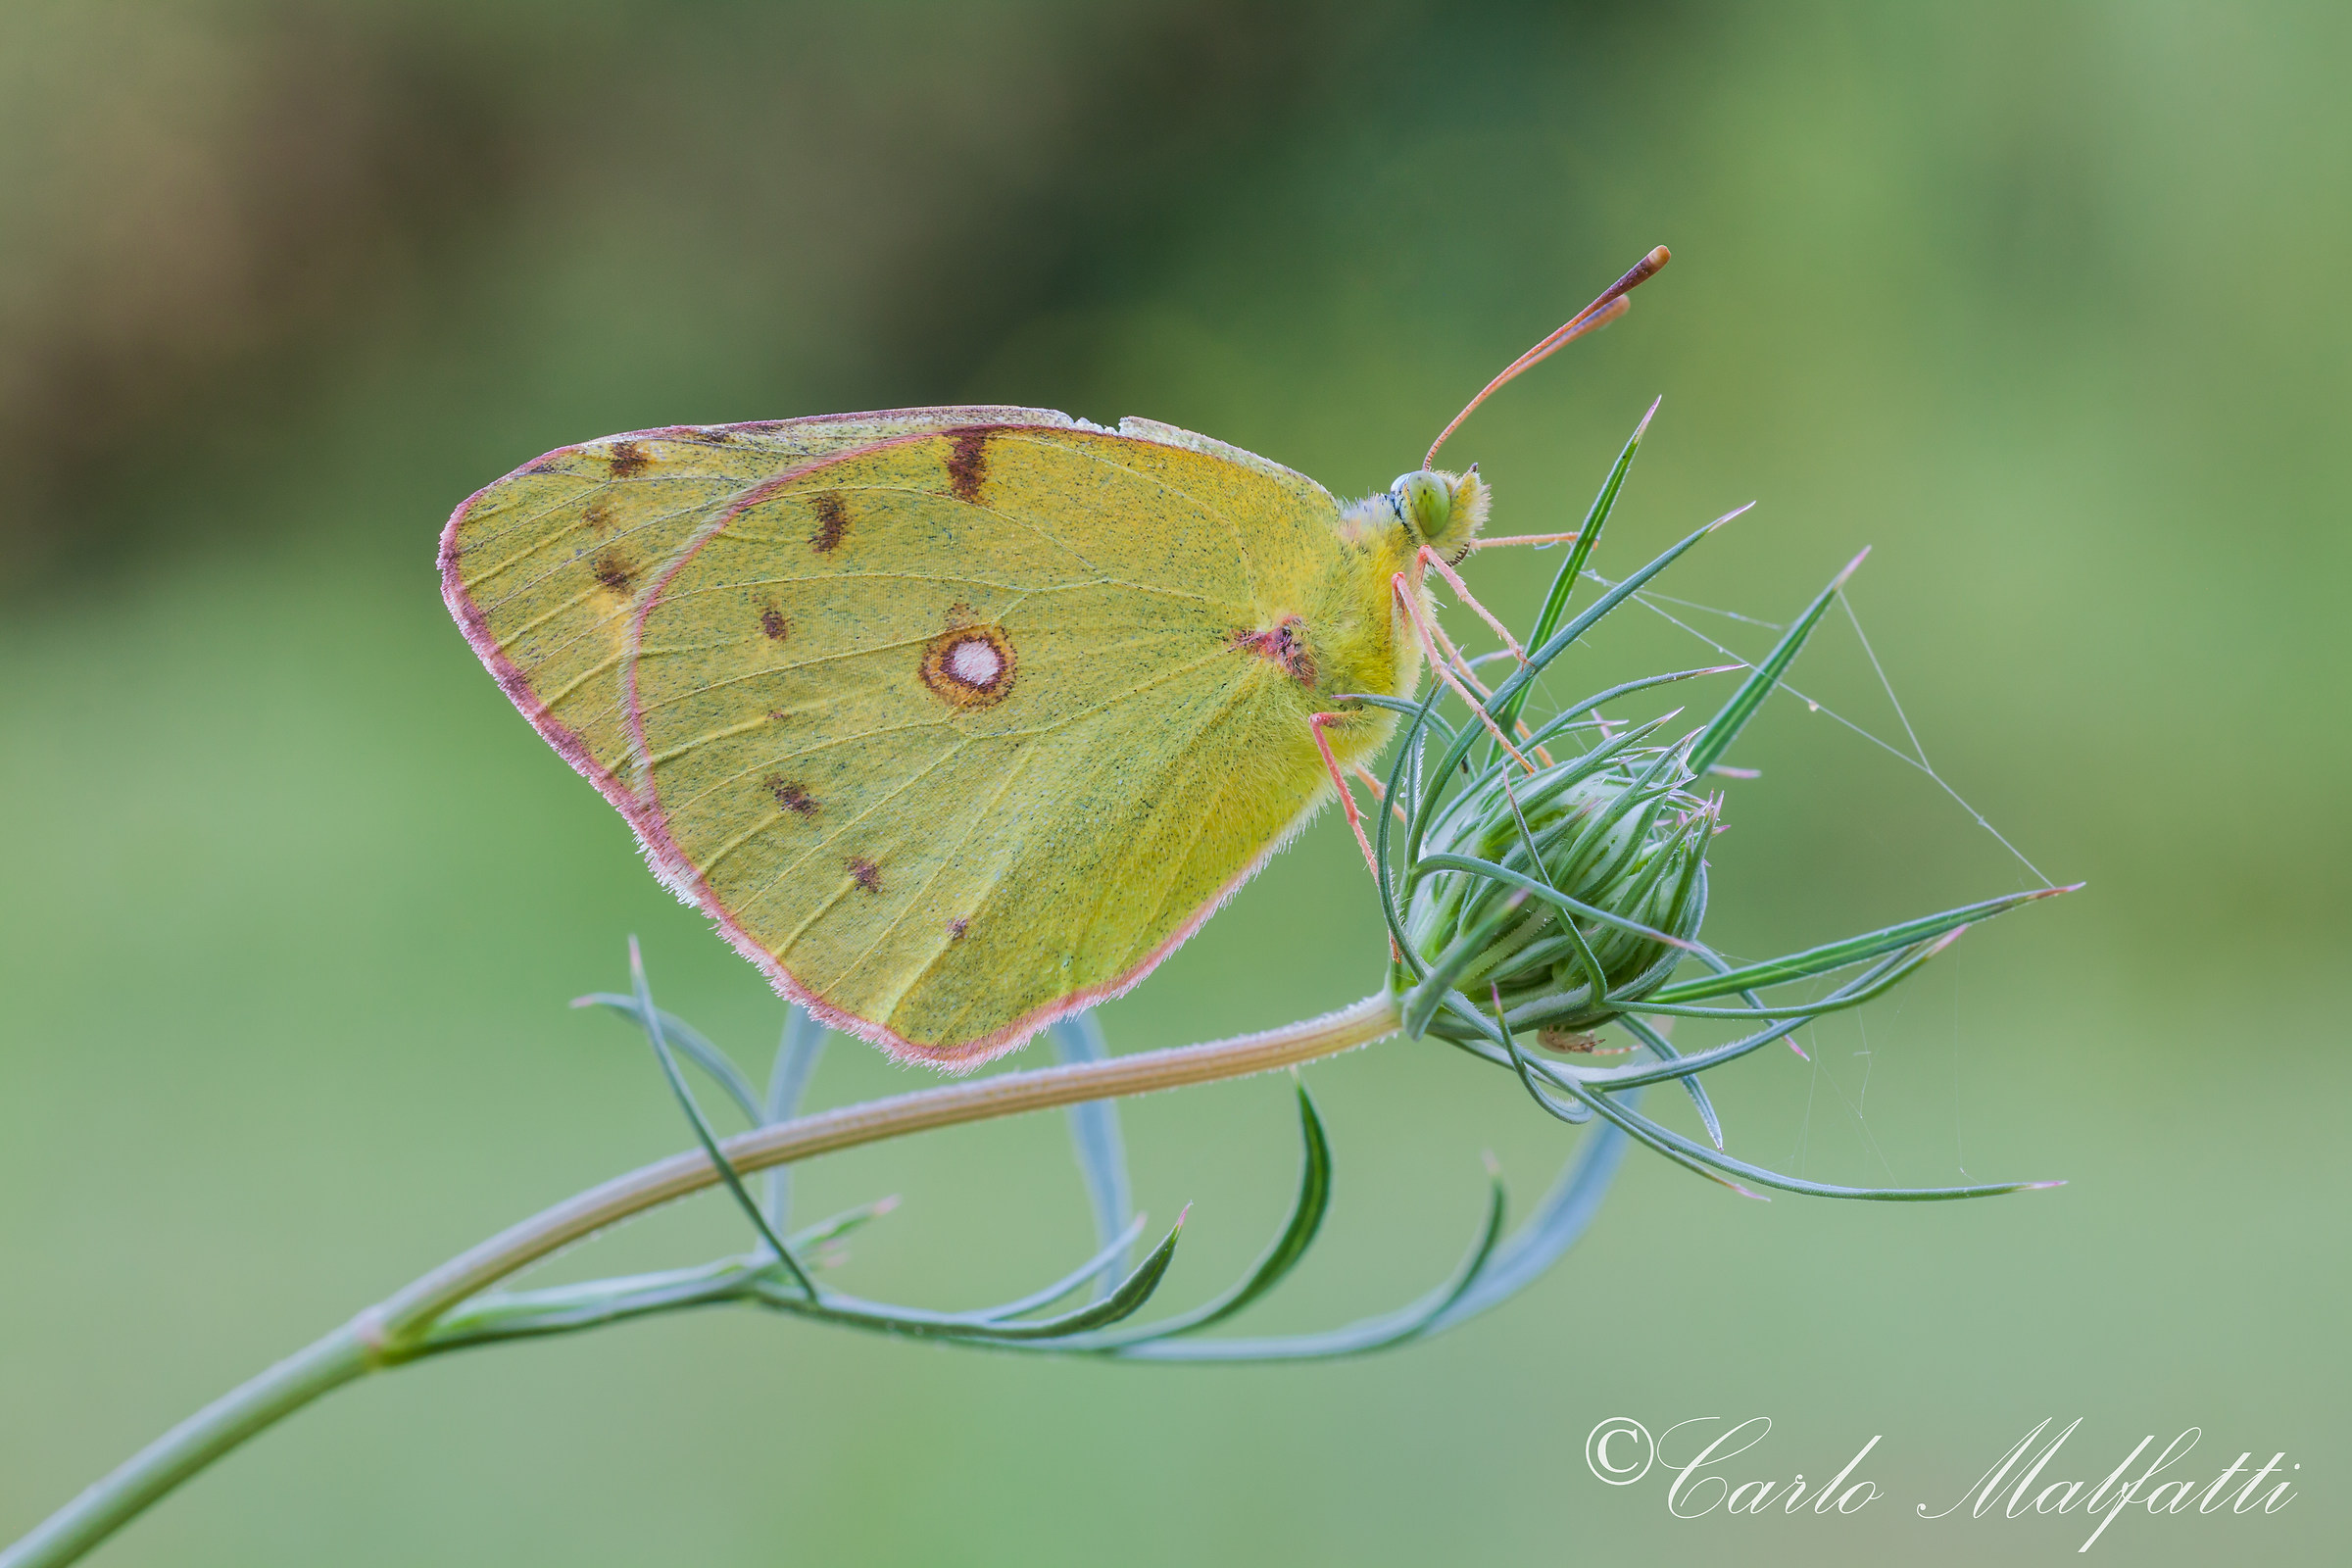 Other Wonderful Colias...